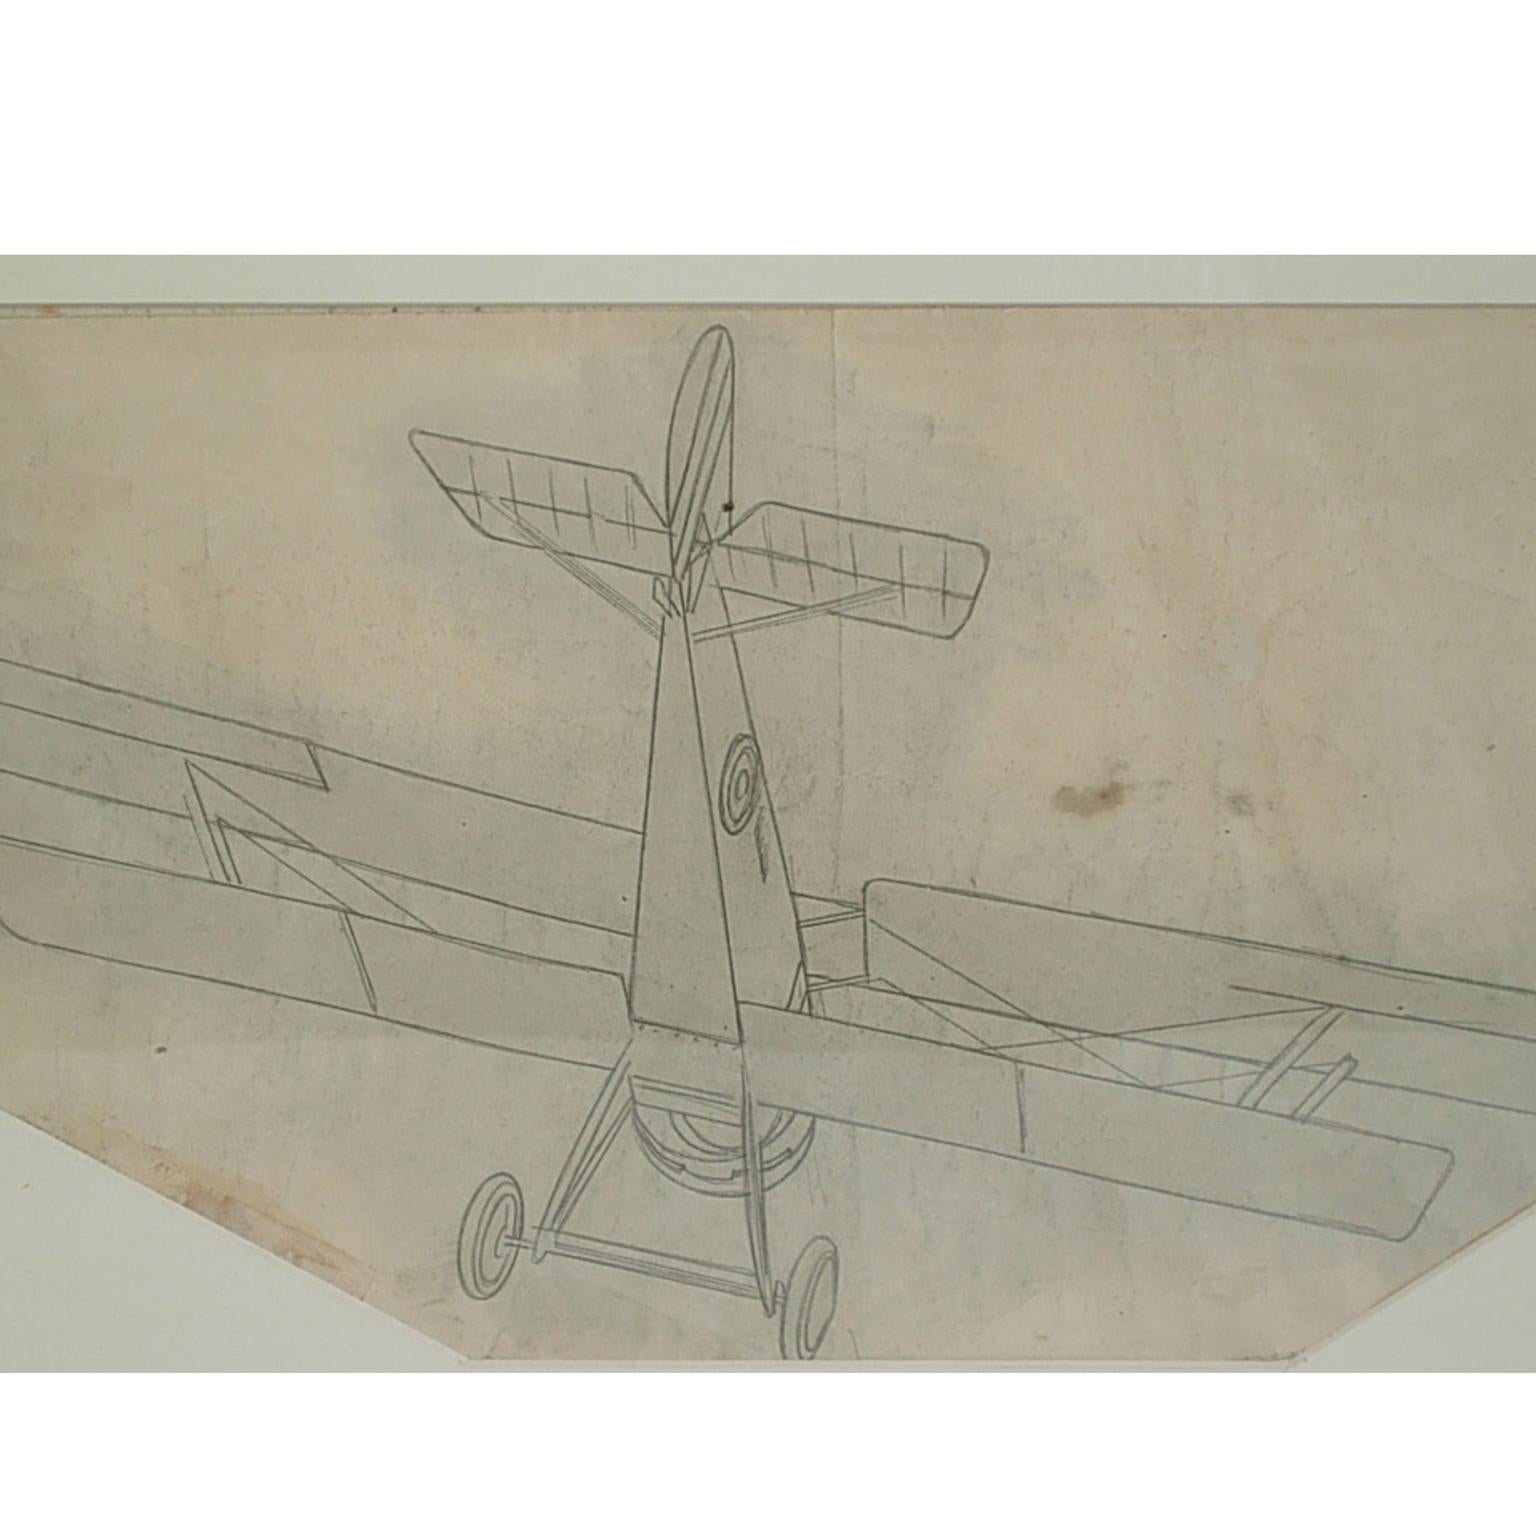 Pencil drawing depicting a single-seat biplane airplane fighter Hanriot HD 1, by Riccardo Cavigioli. Measure with frame cm 49 x 31 - inch19.3 x 11.8.
Riccardo Cavigioli was born in Milan on 10th November 1895 and he died in Gavirate (VA) on 27th